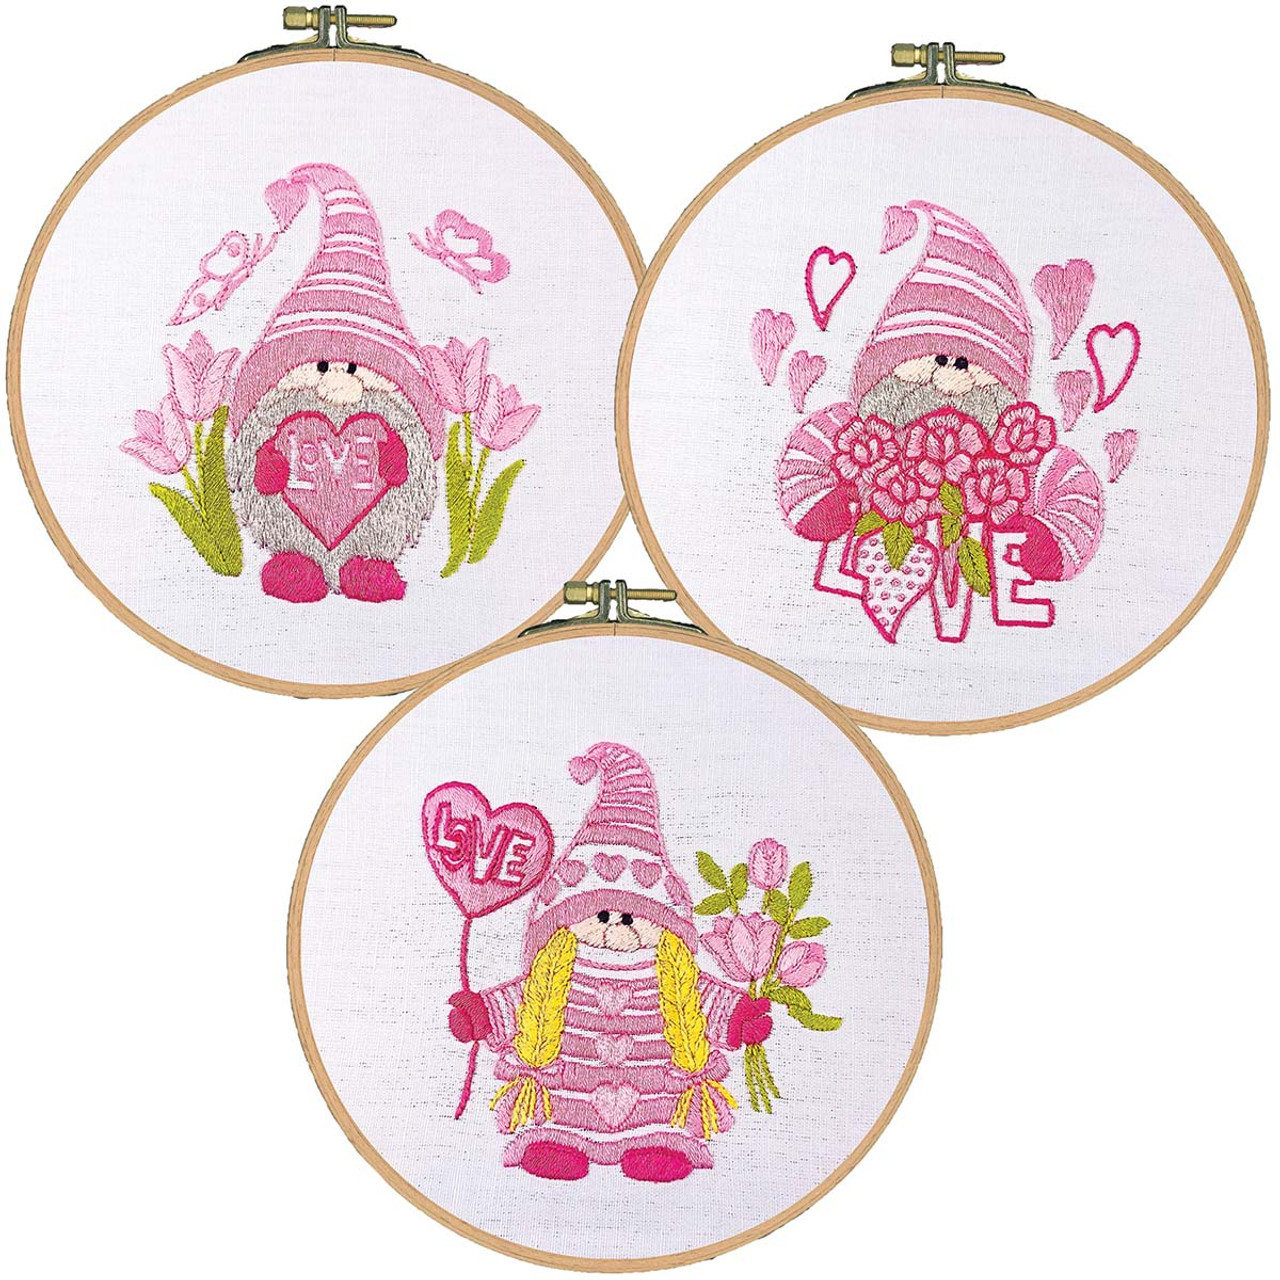 Craftways Two Cardinals Hoop Stamped Embroidery Kit